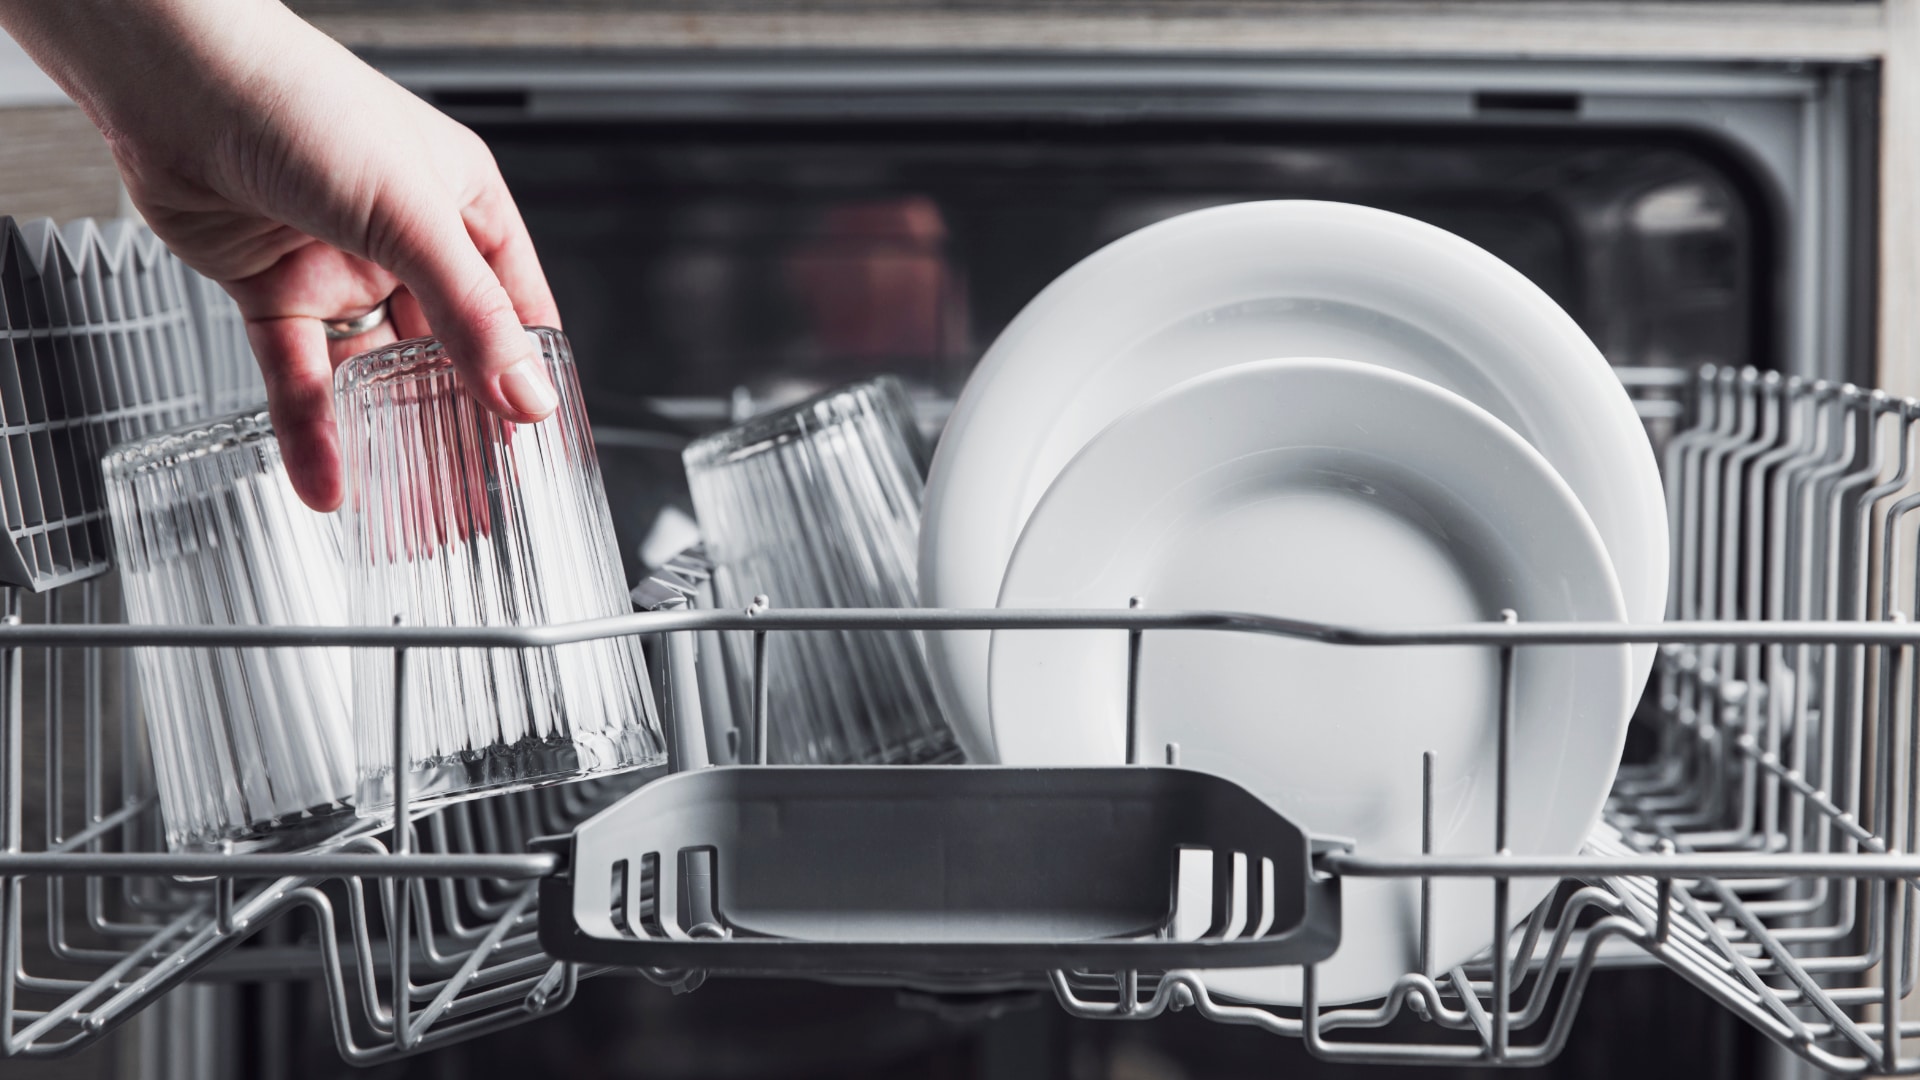 Featured image for “Dishwasher Making Noise? The Different Noises Explained”